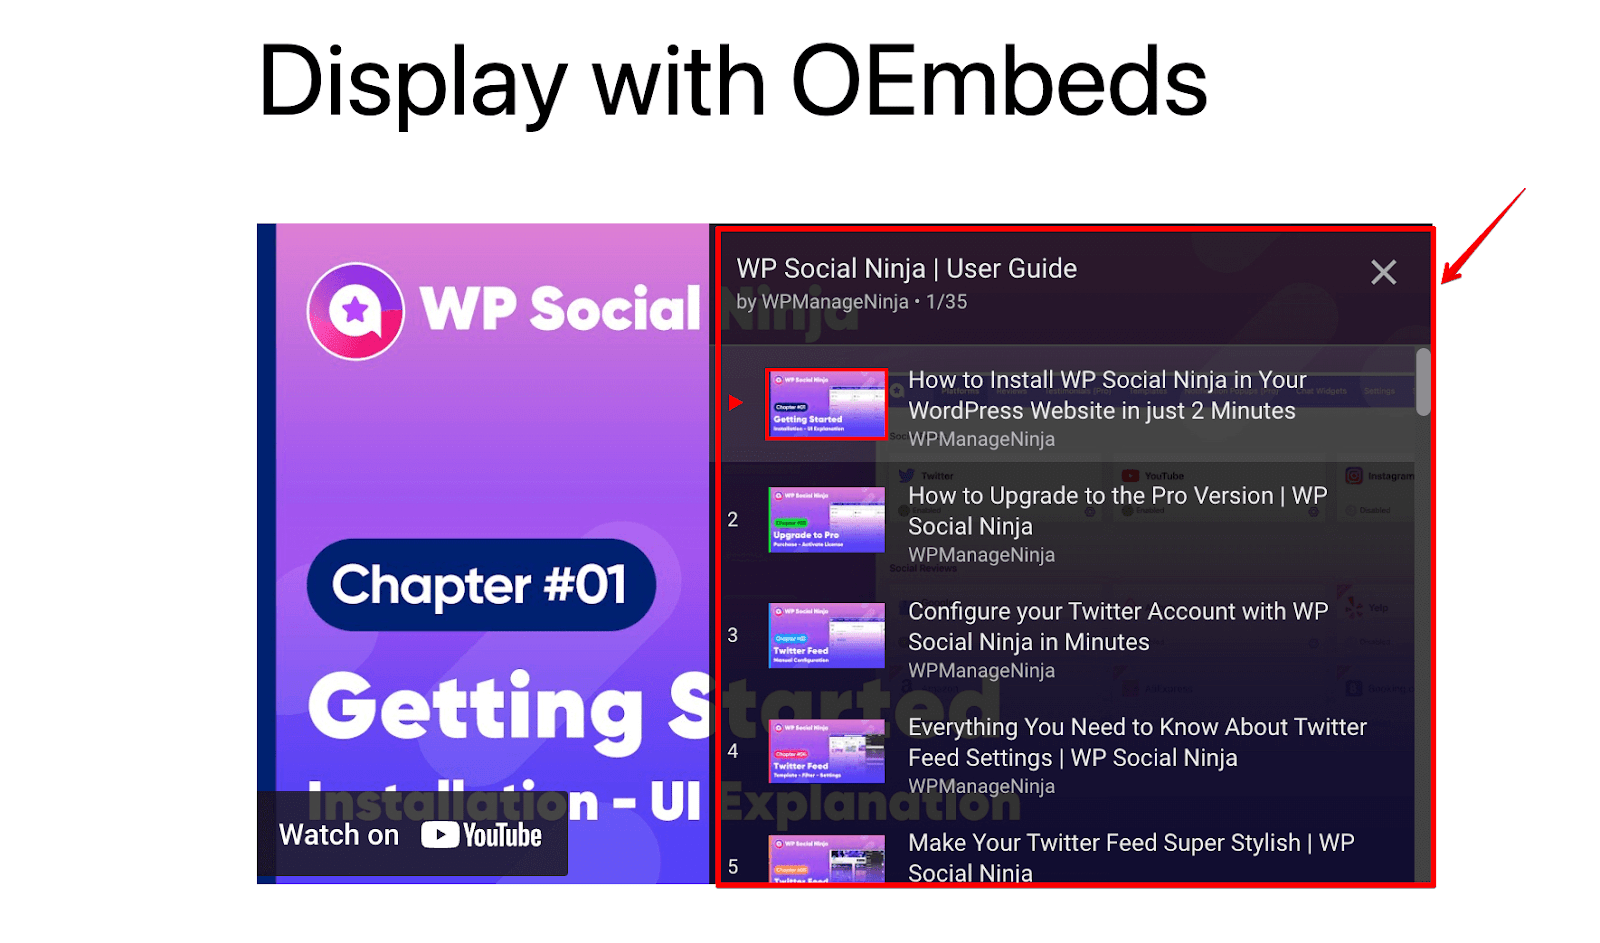 Overall preview of the embedded playlist